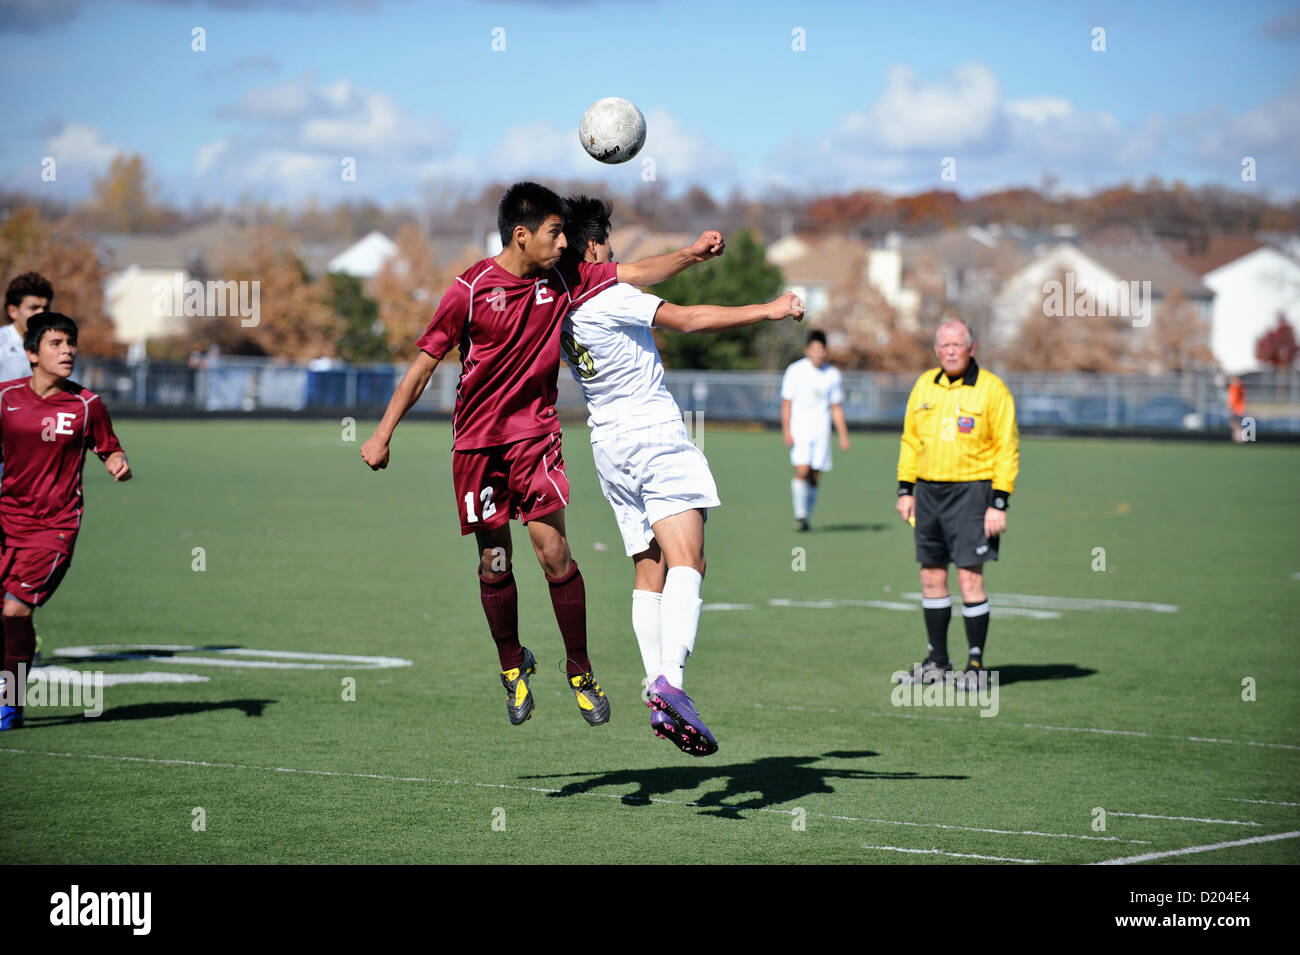 Soccer players battle for position for a header during a high school match. USA. Stock Photo